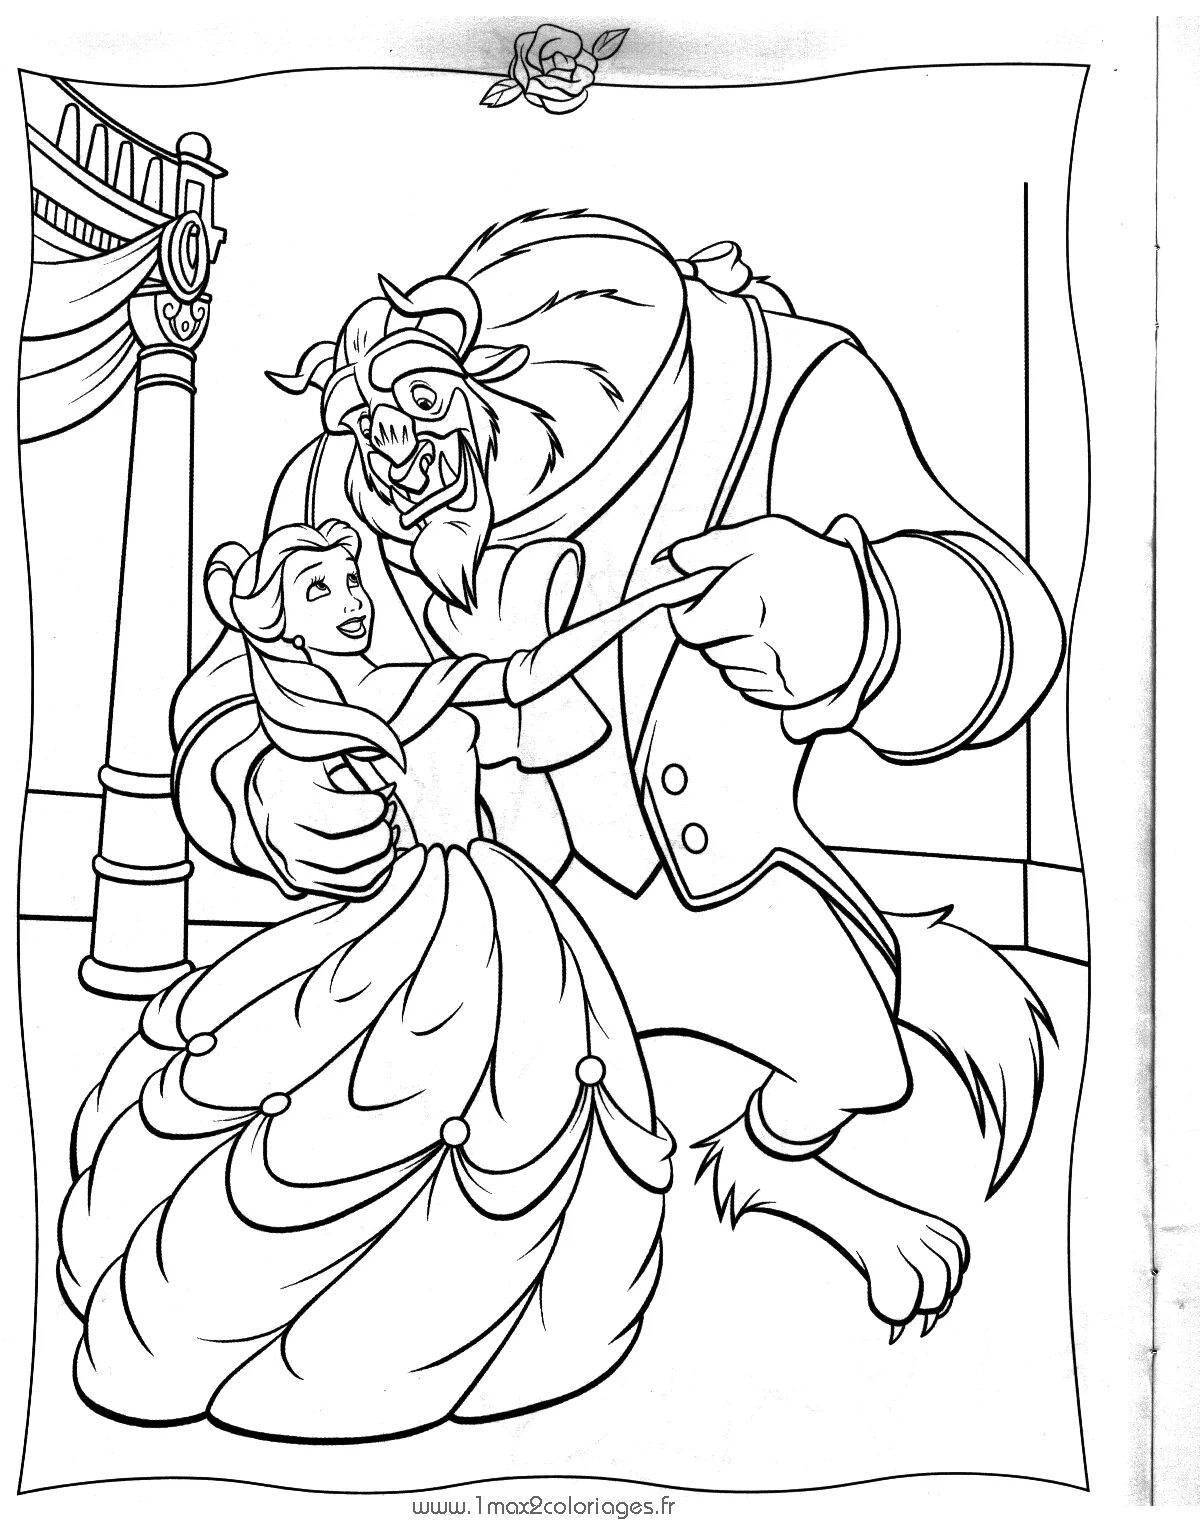 Bright beauty and the beast coloring pages for kids